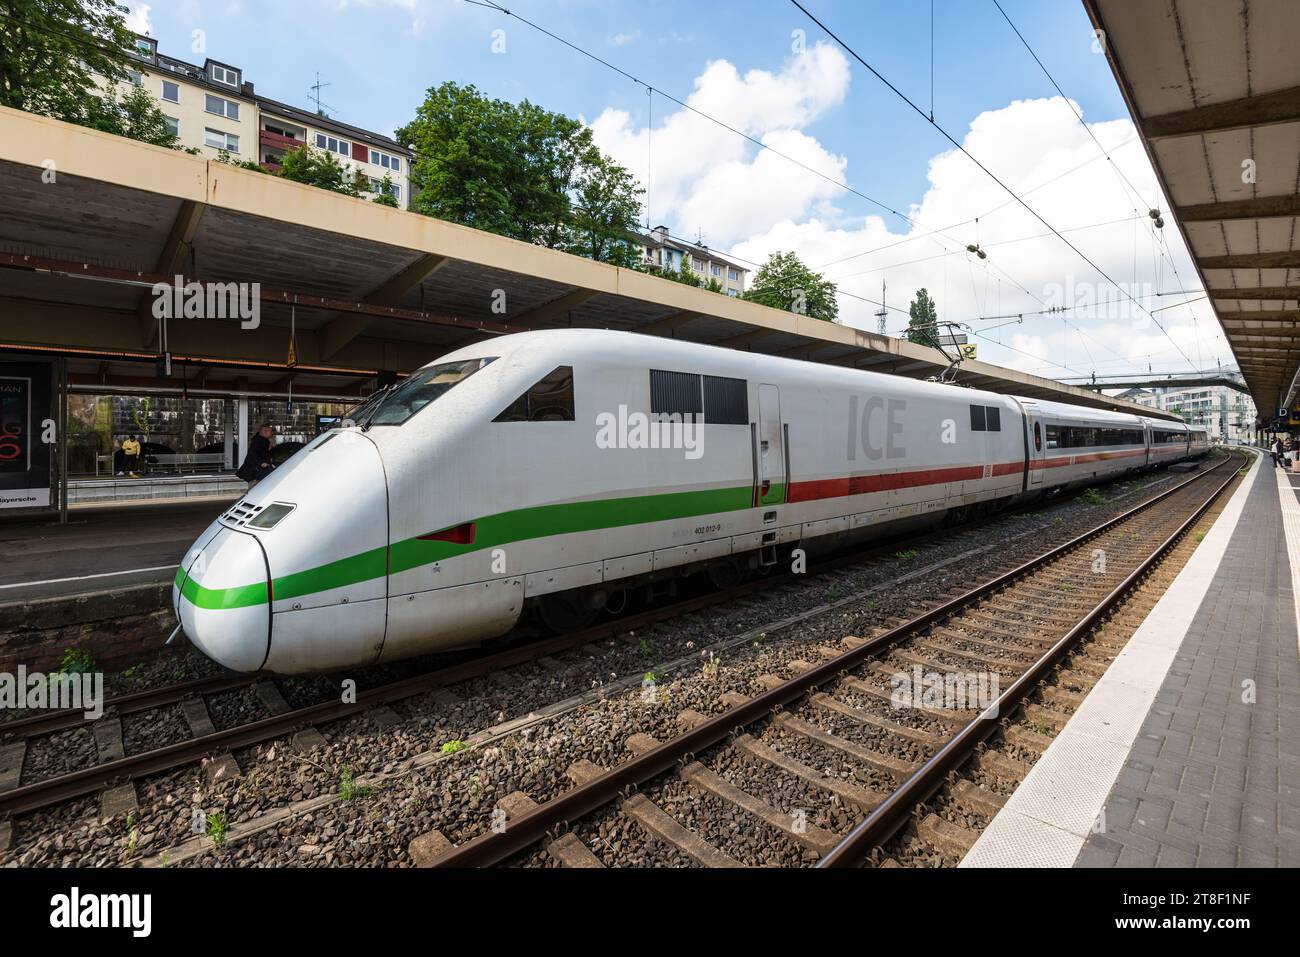 Wuppertal, Germany - June 2, 2022: The high-speed ICE train of Deutsche Bahn stops at the platform at the Wuppertal railway station in North Rhine-Wes Stock Photo